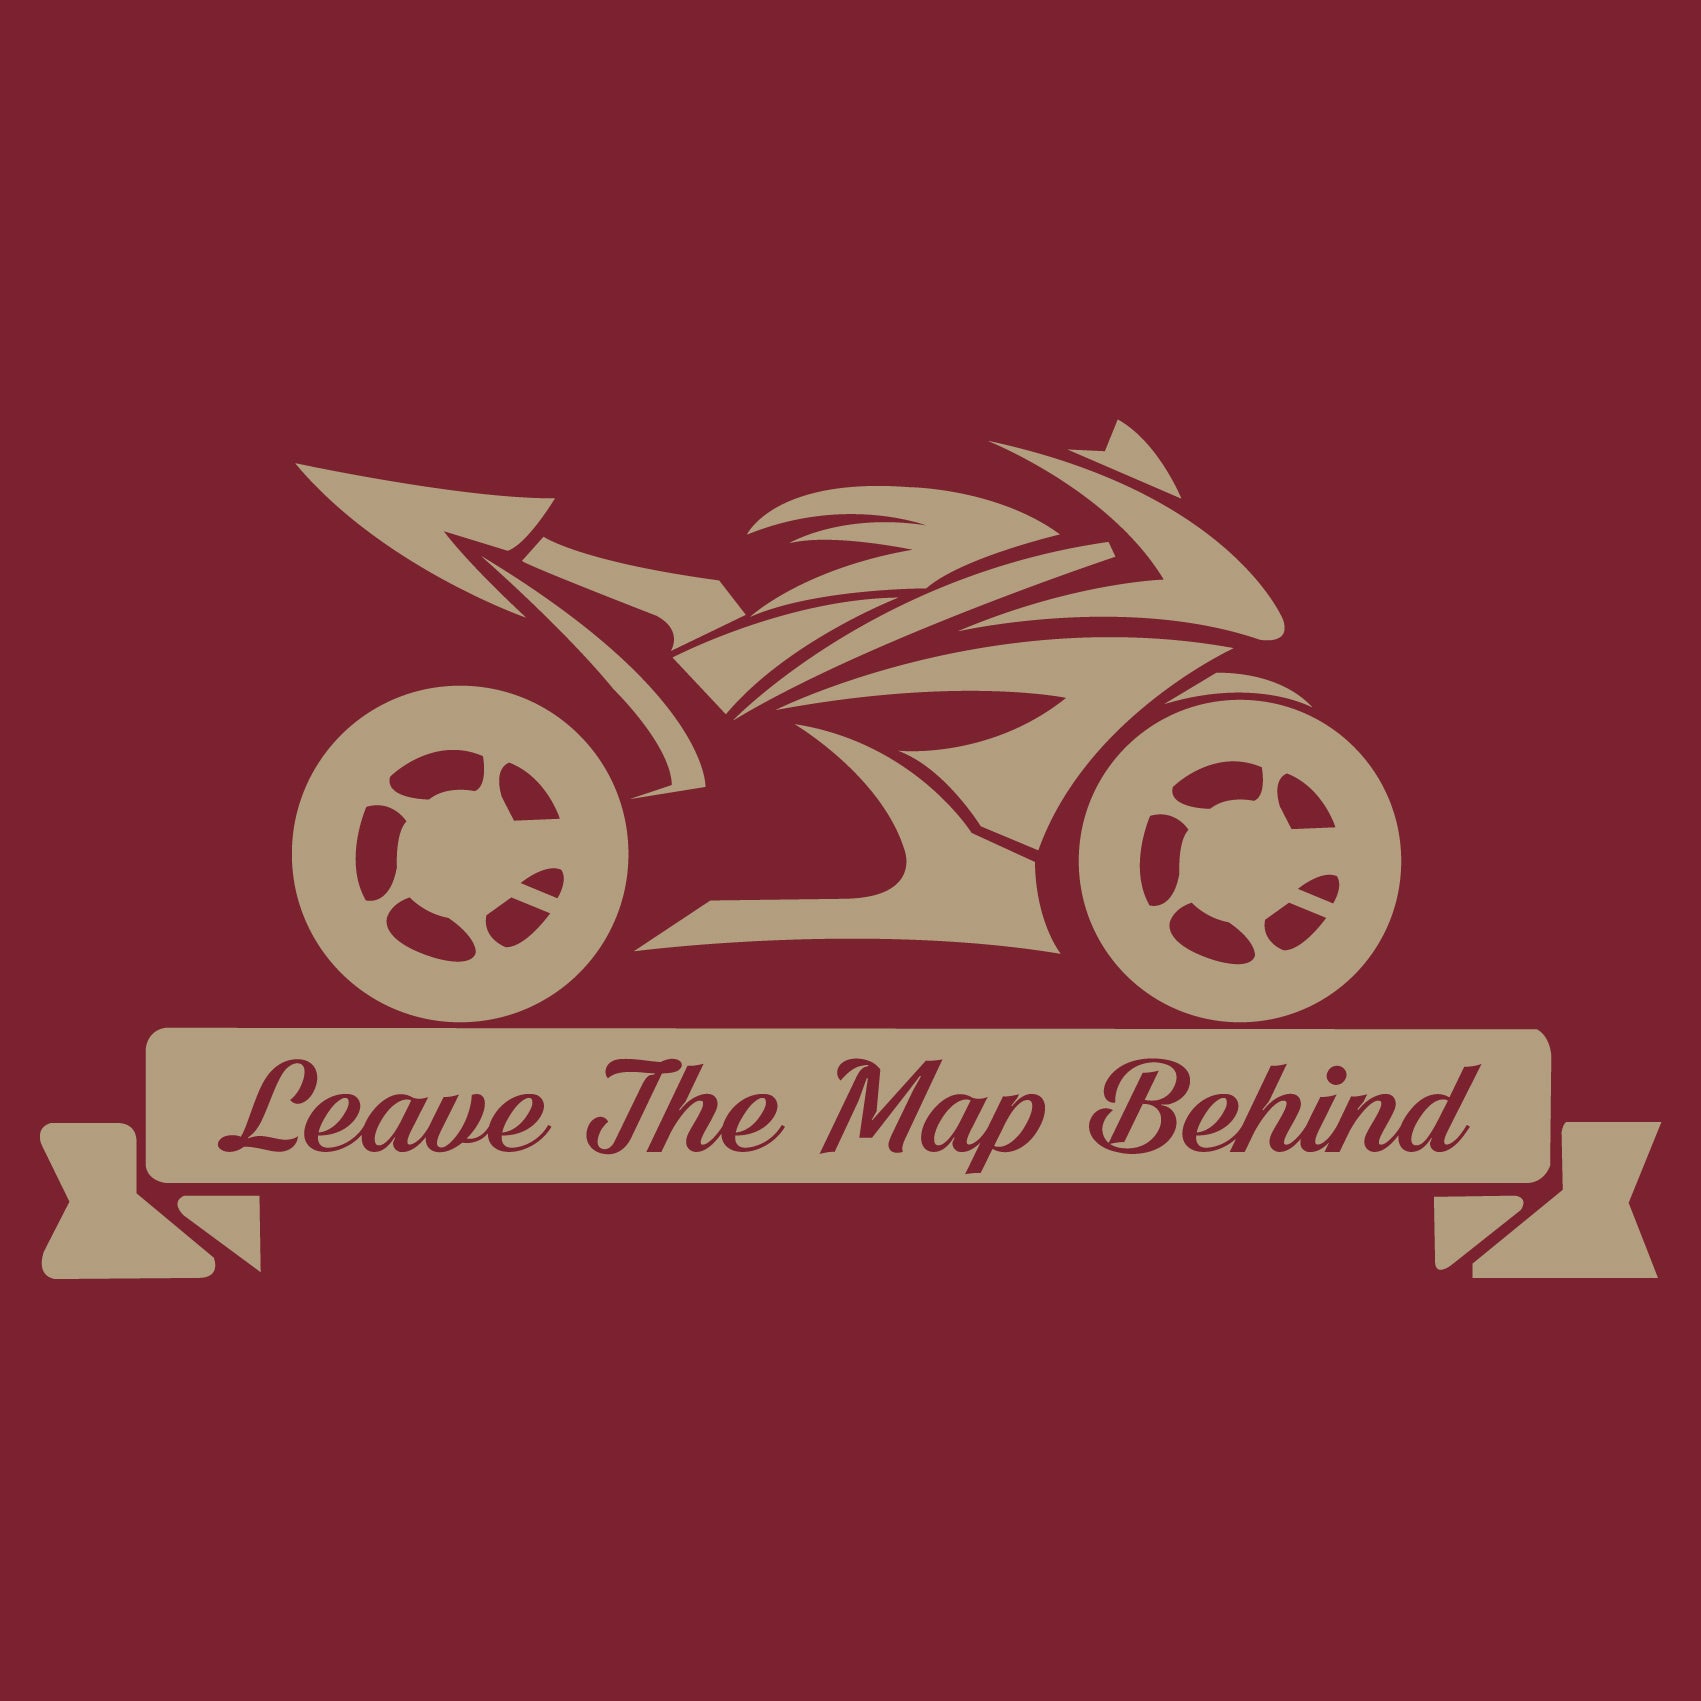 Leave The Map Behind Reactr Tshirts For Men - Eyewearlabs